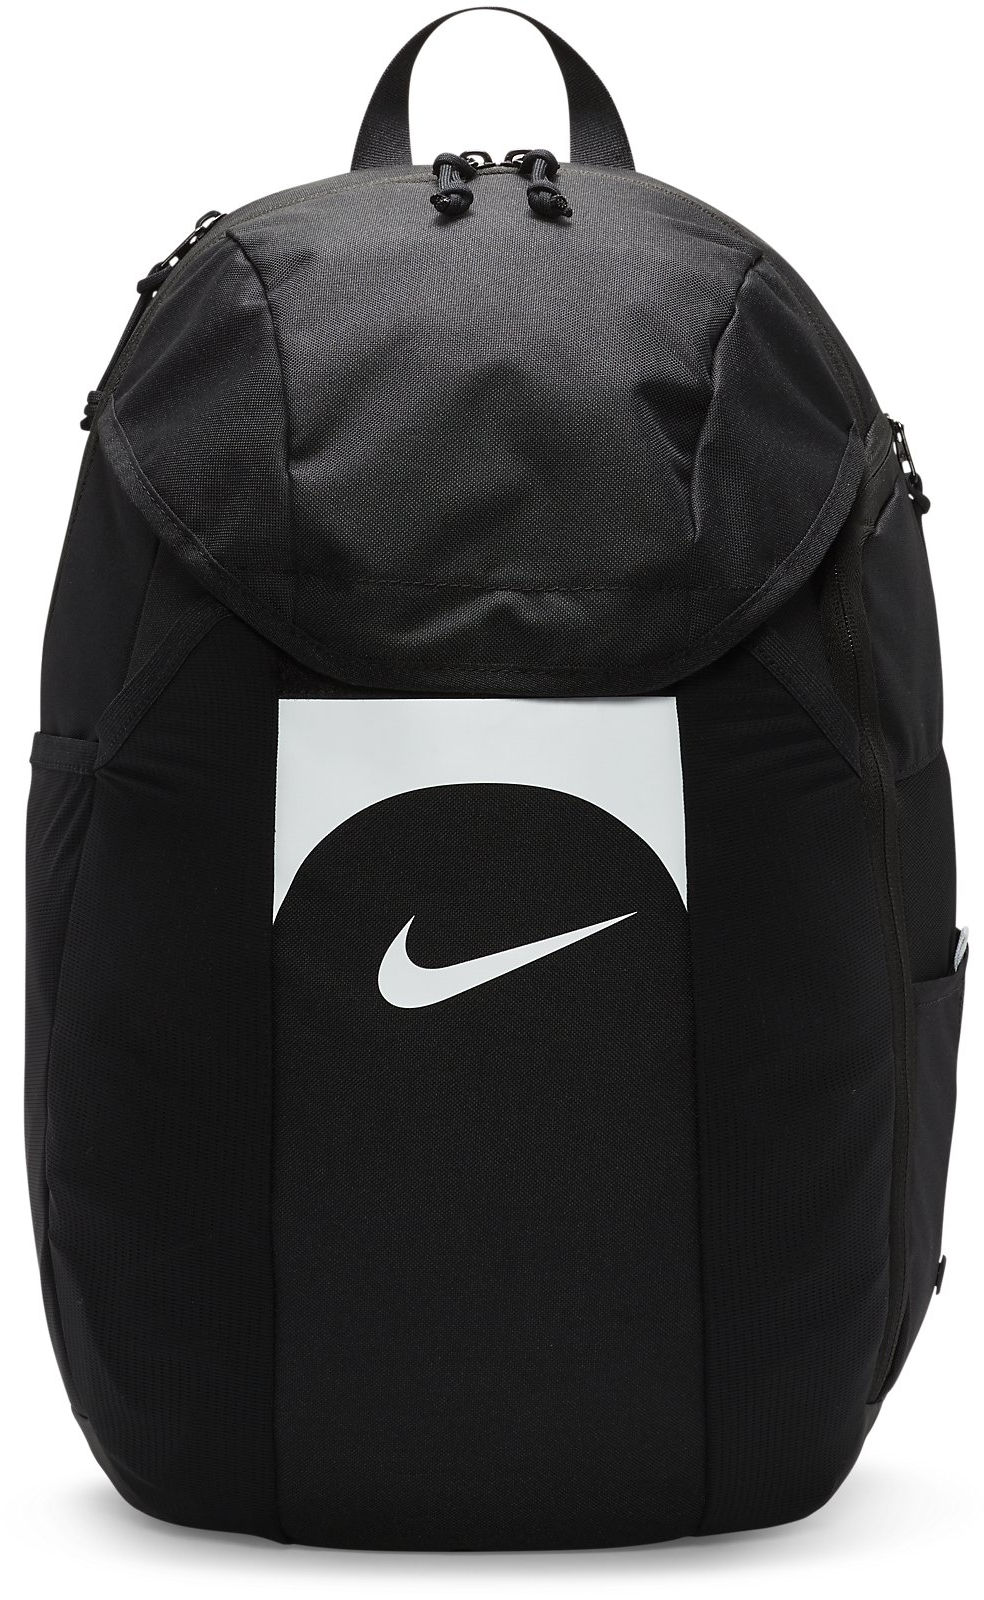 Academy Team Backpack (30l)